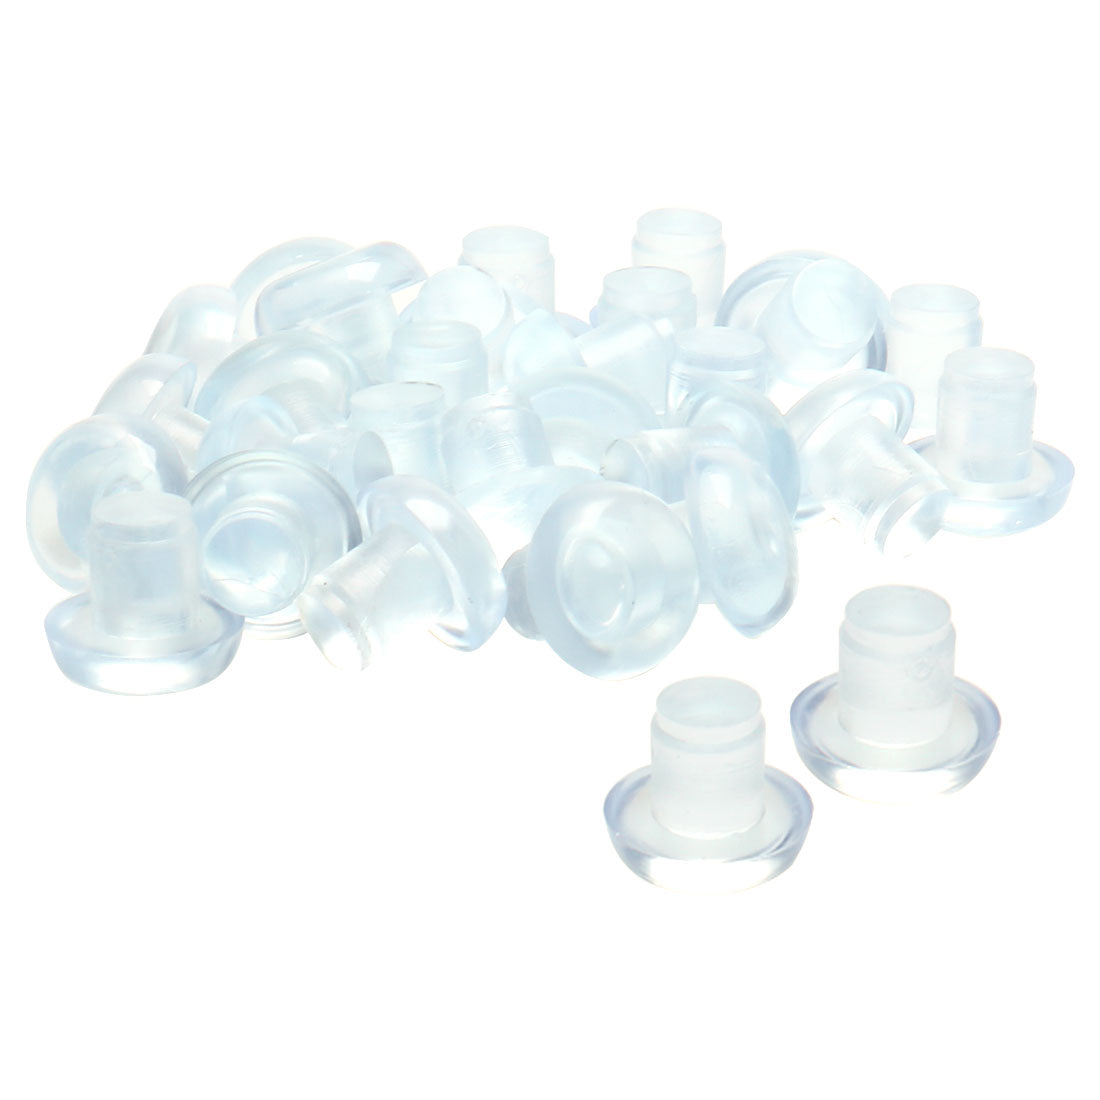 uxcell Uxcell 30pcs 8mm Clear Stem Bumpers Glide, Patio Outdoor Furniture Glass Table Desk Top Anti-collision Embedded